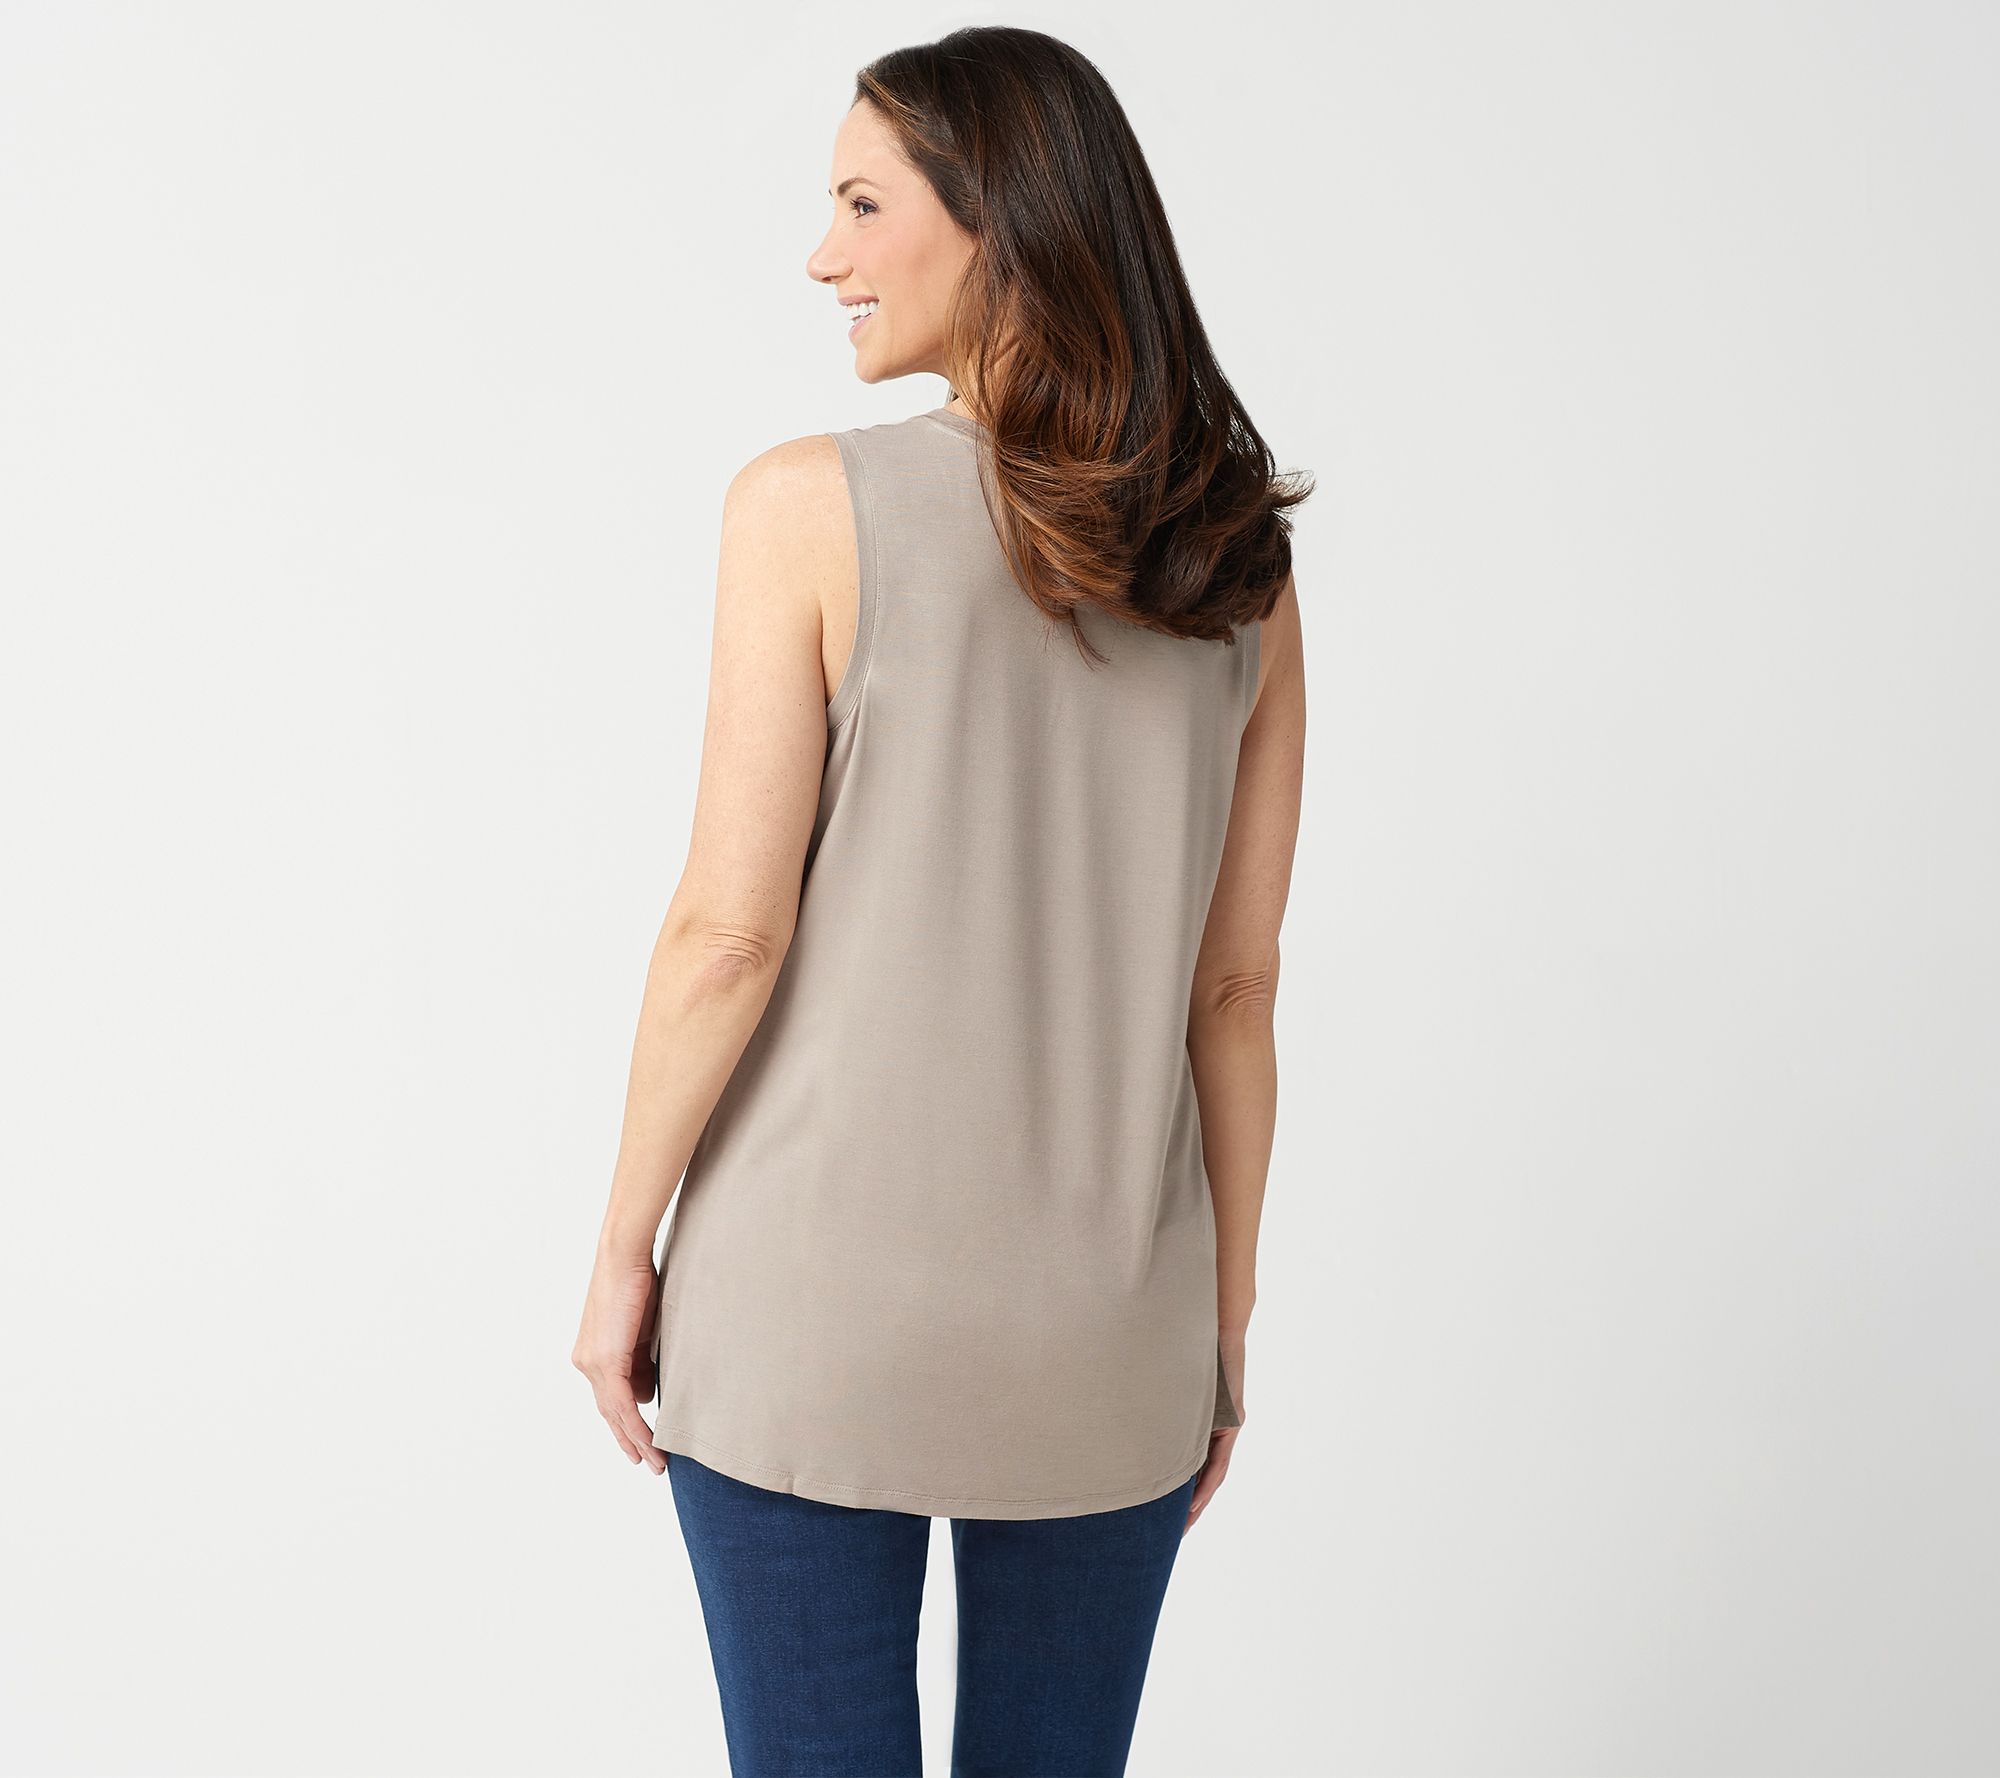 Lisa Rinna Collection Sleeveless Tank with Side Slits - QVC.com